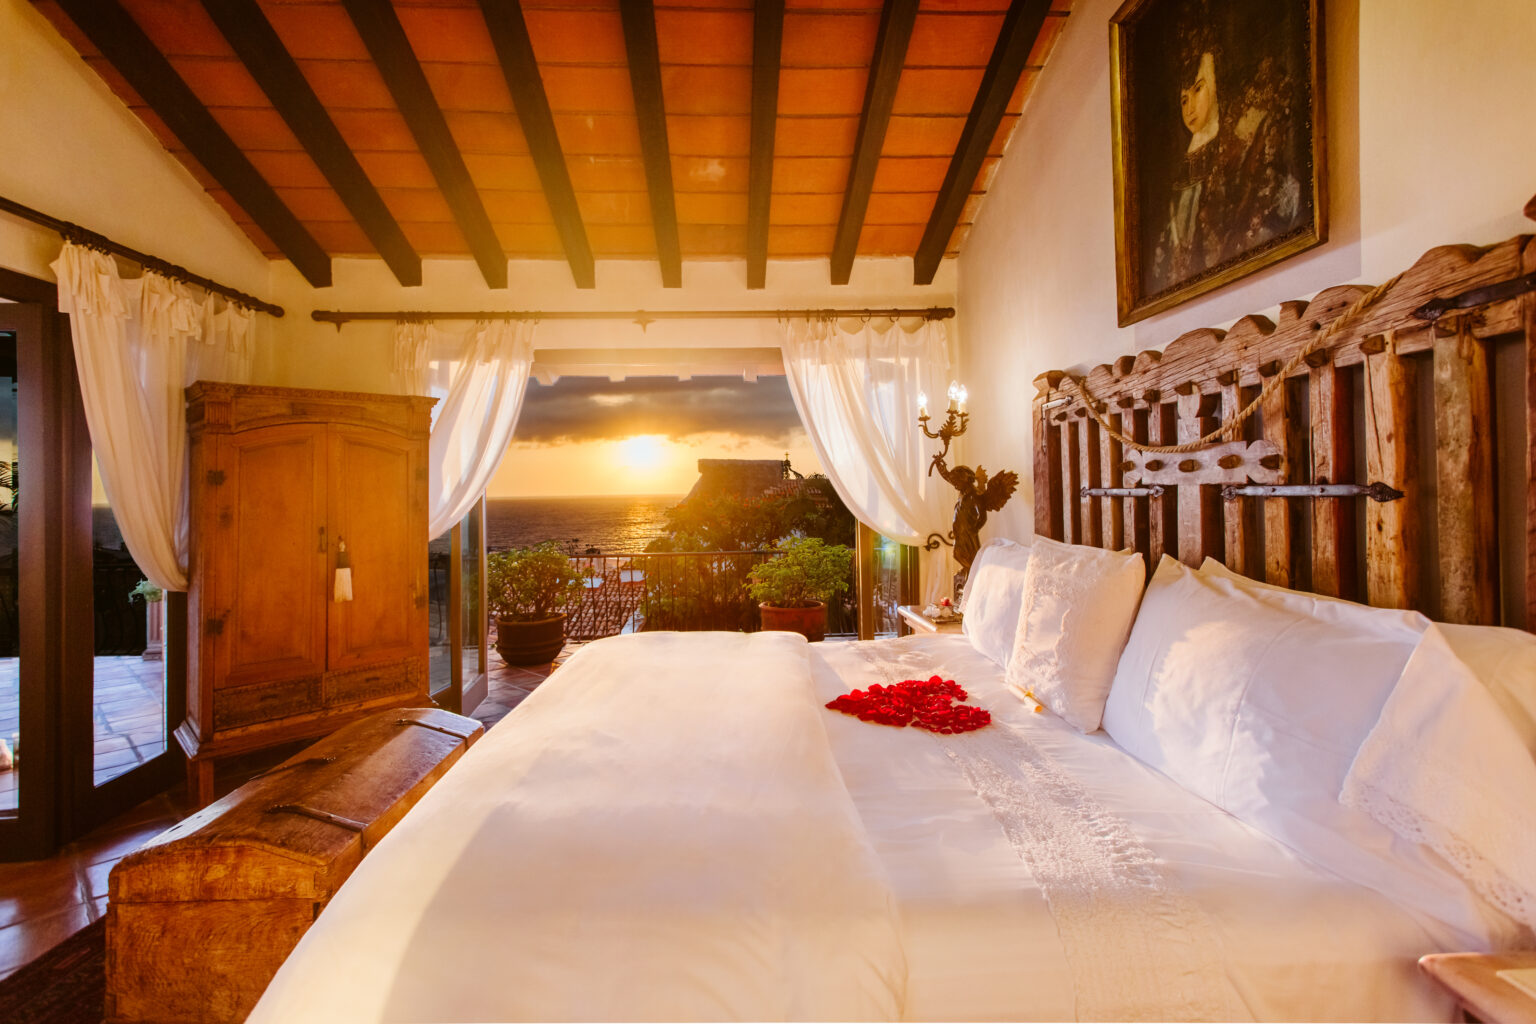 San Miguel Presidential Suite bed with heart made of rose petals and sunset view